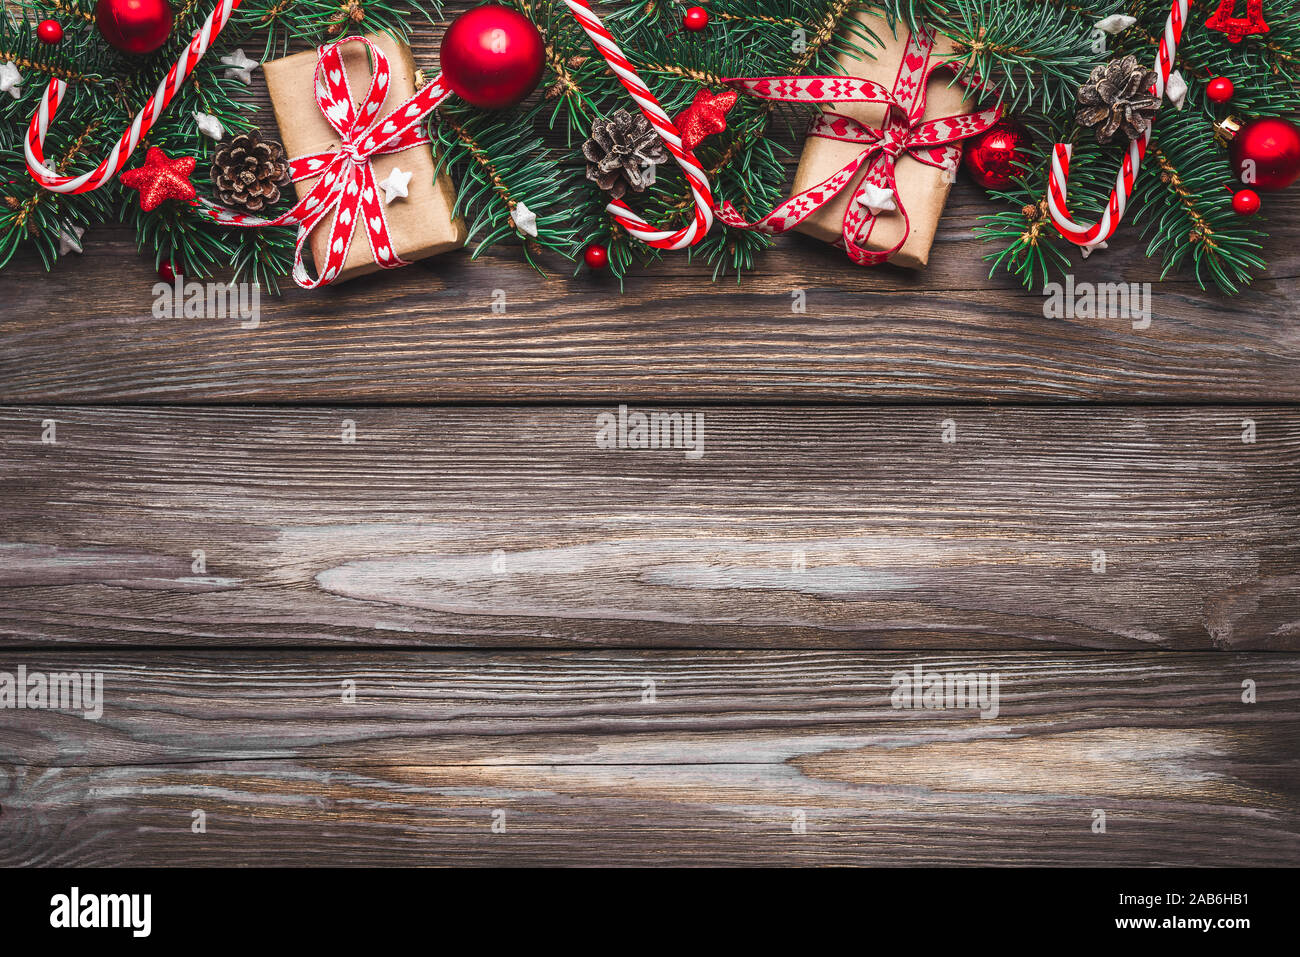 Christmas composition. Fir tree branches, gift boxes, decorations, candy, pine cones on rustic wooden table. Christmas, winter, new year concept. Flat Stock Photo